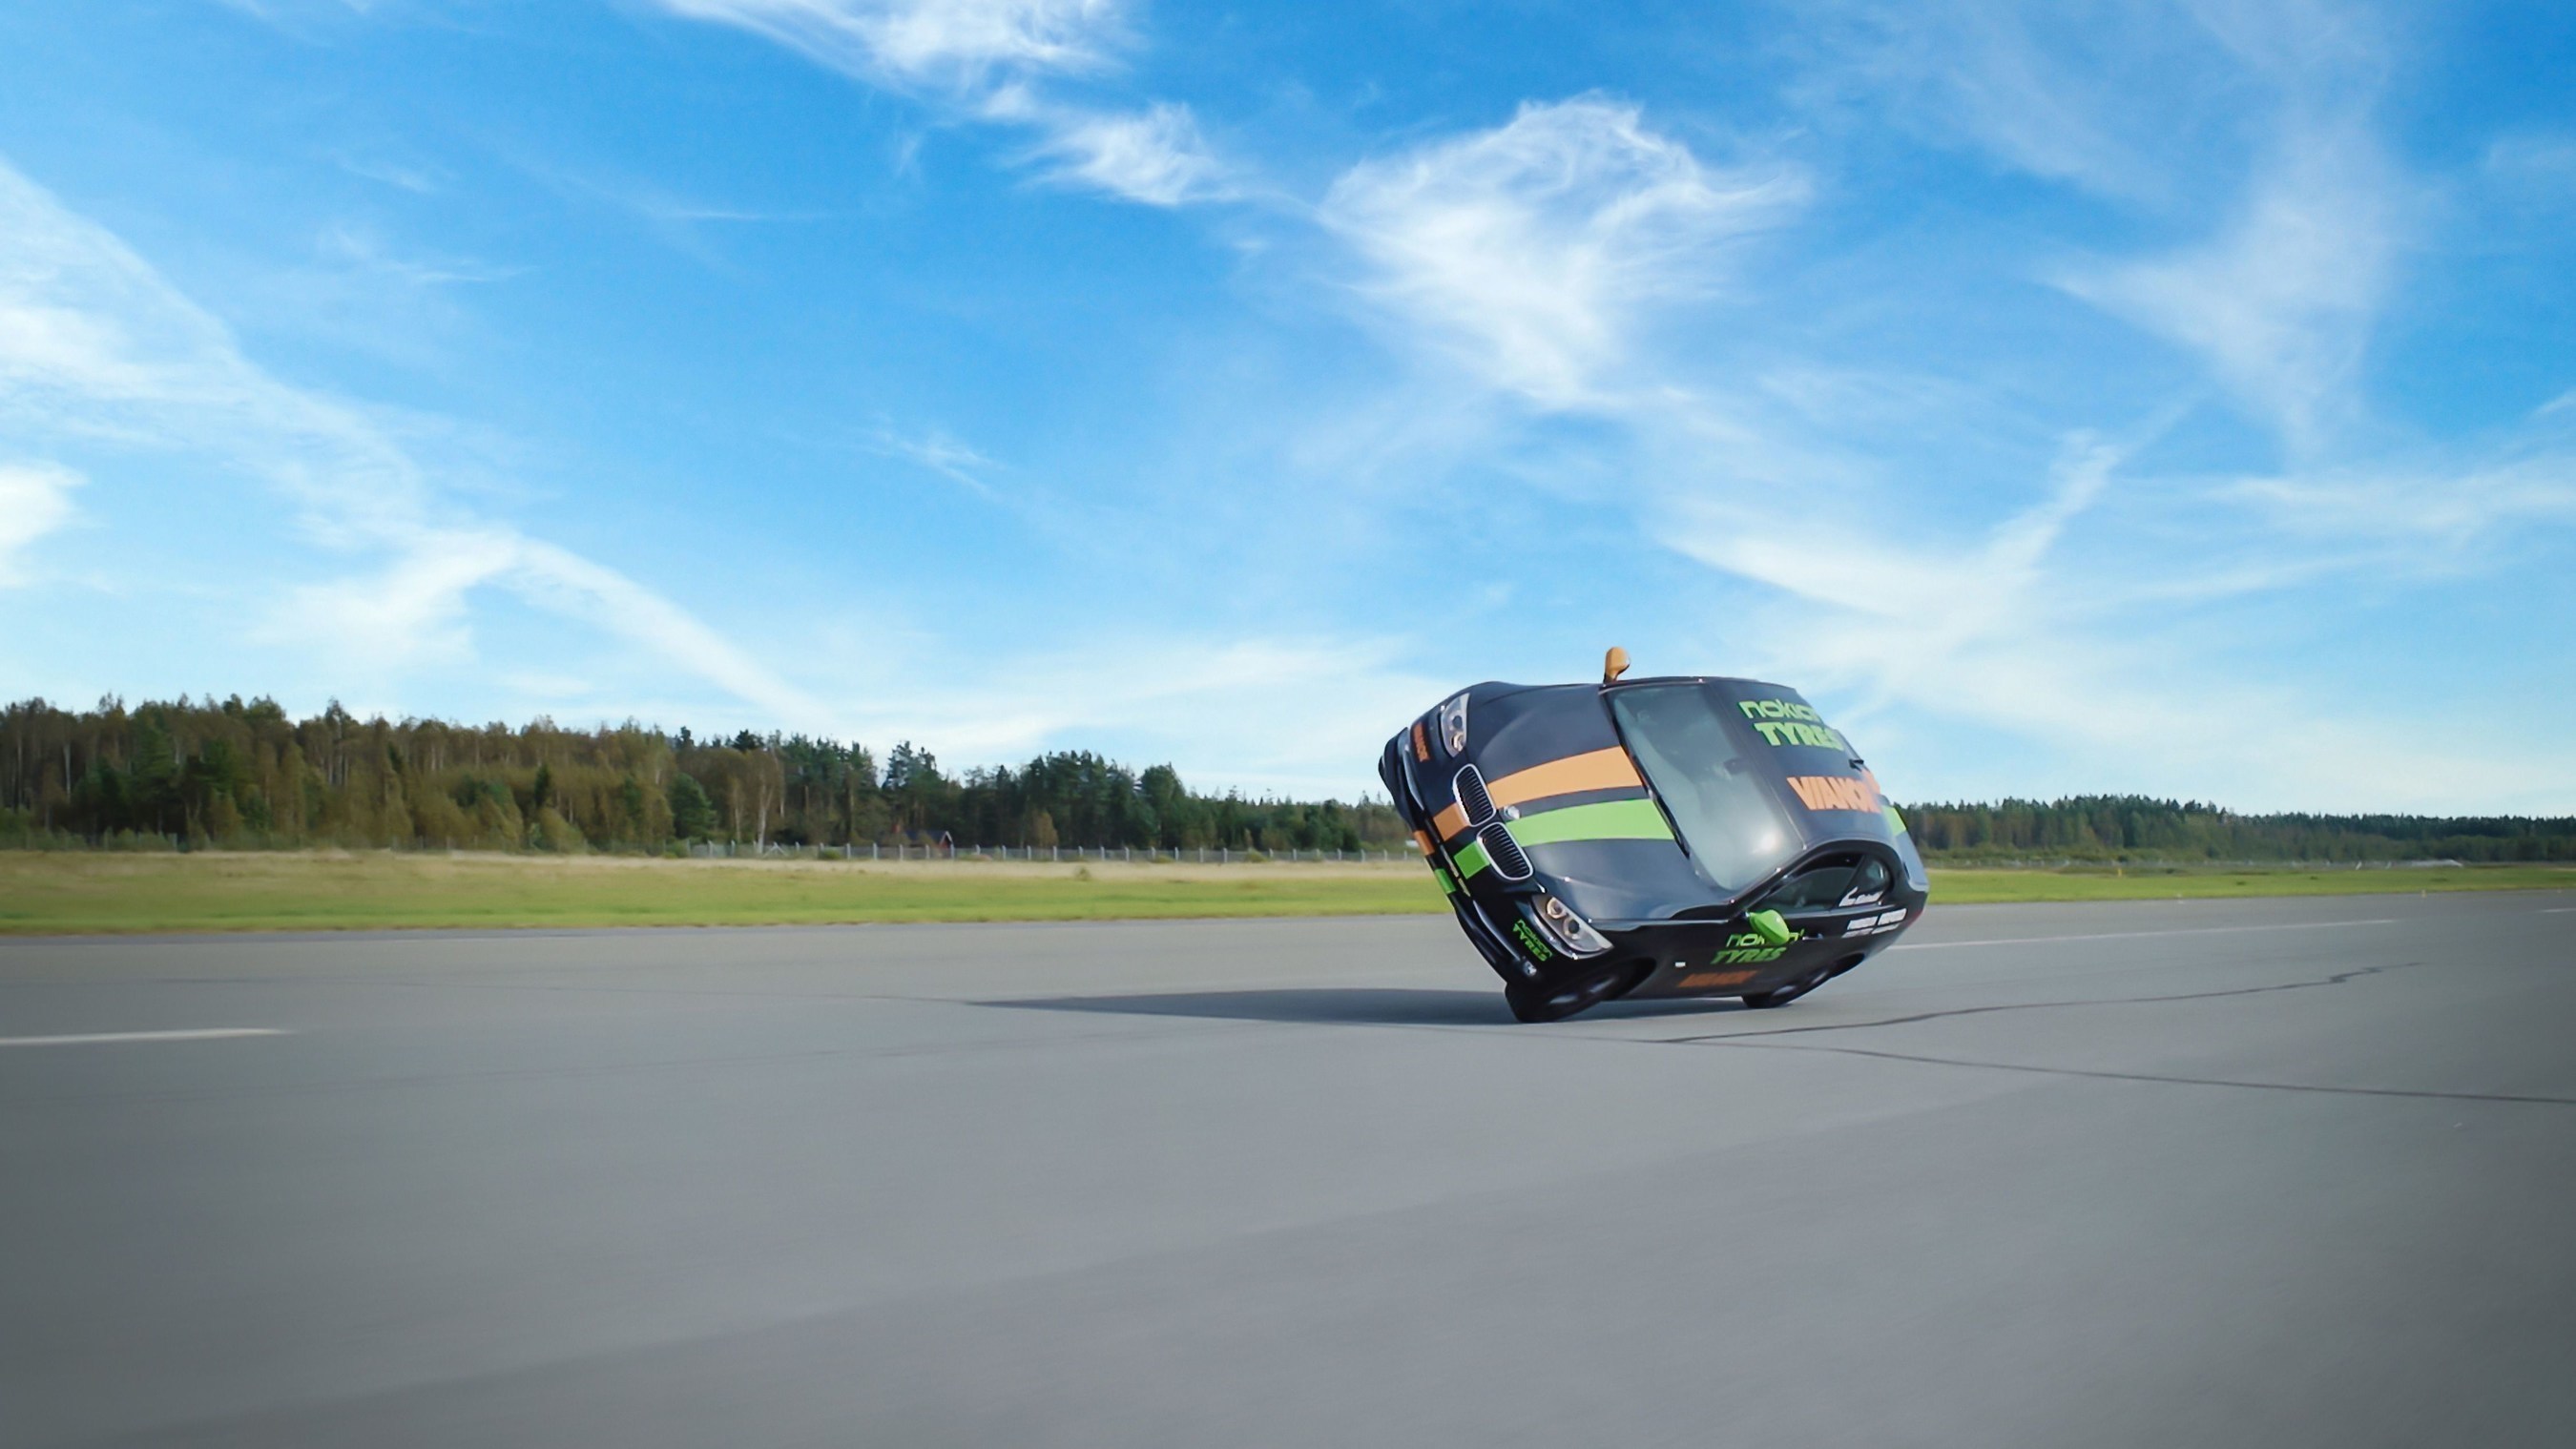 Nokian Tyres - Fastest side wheelie in a car. The new world record for Fastest side wheelie in a car was achieved by Nokian Tyres, when stunt driver Vesa Kivimäki drove at a speed of 186,269 kilometres per hour (115.742 mph). The tyres on the record-breaking car were reinforced with Nokian Tyres Aramid Sidewall technology. More: www.nokiantyres.com/fastestwheelie (PRNewsFoto/Nokian Tyres)